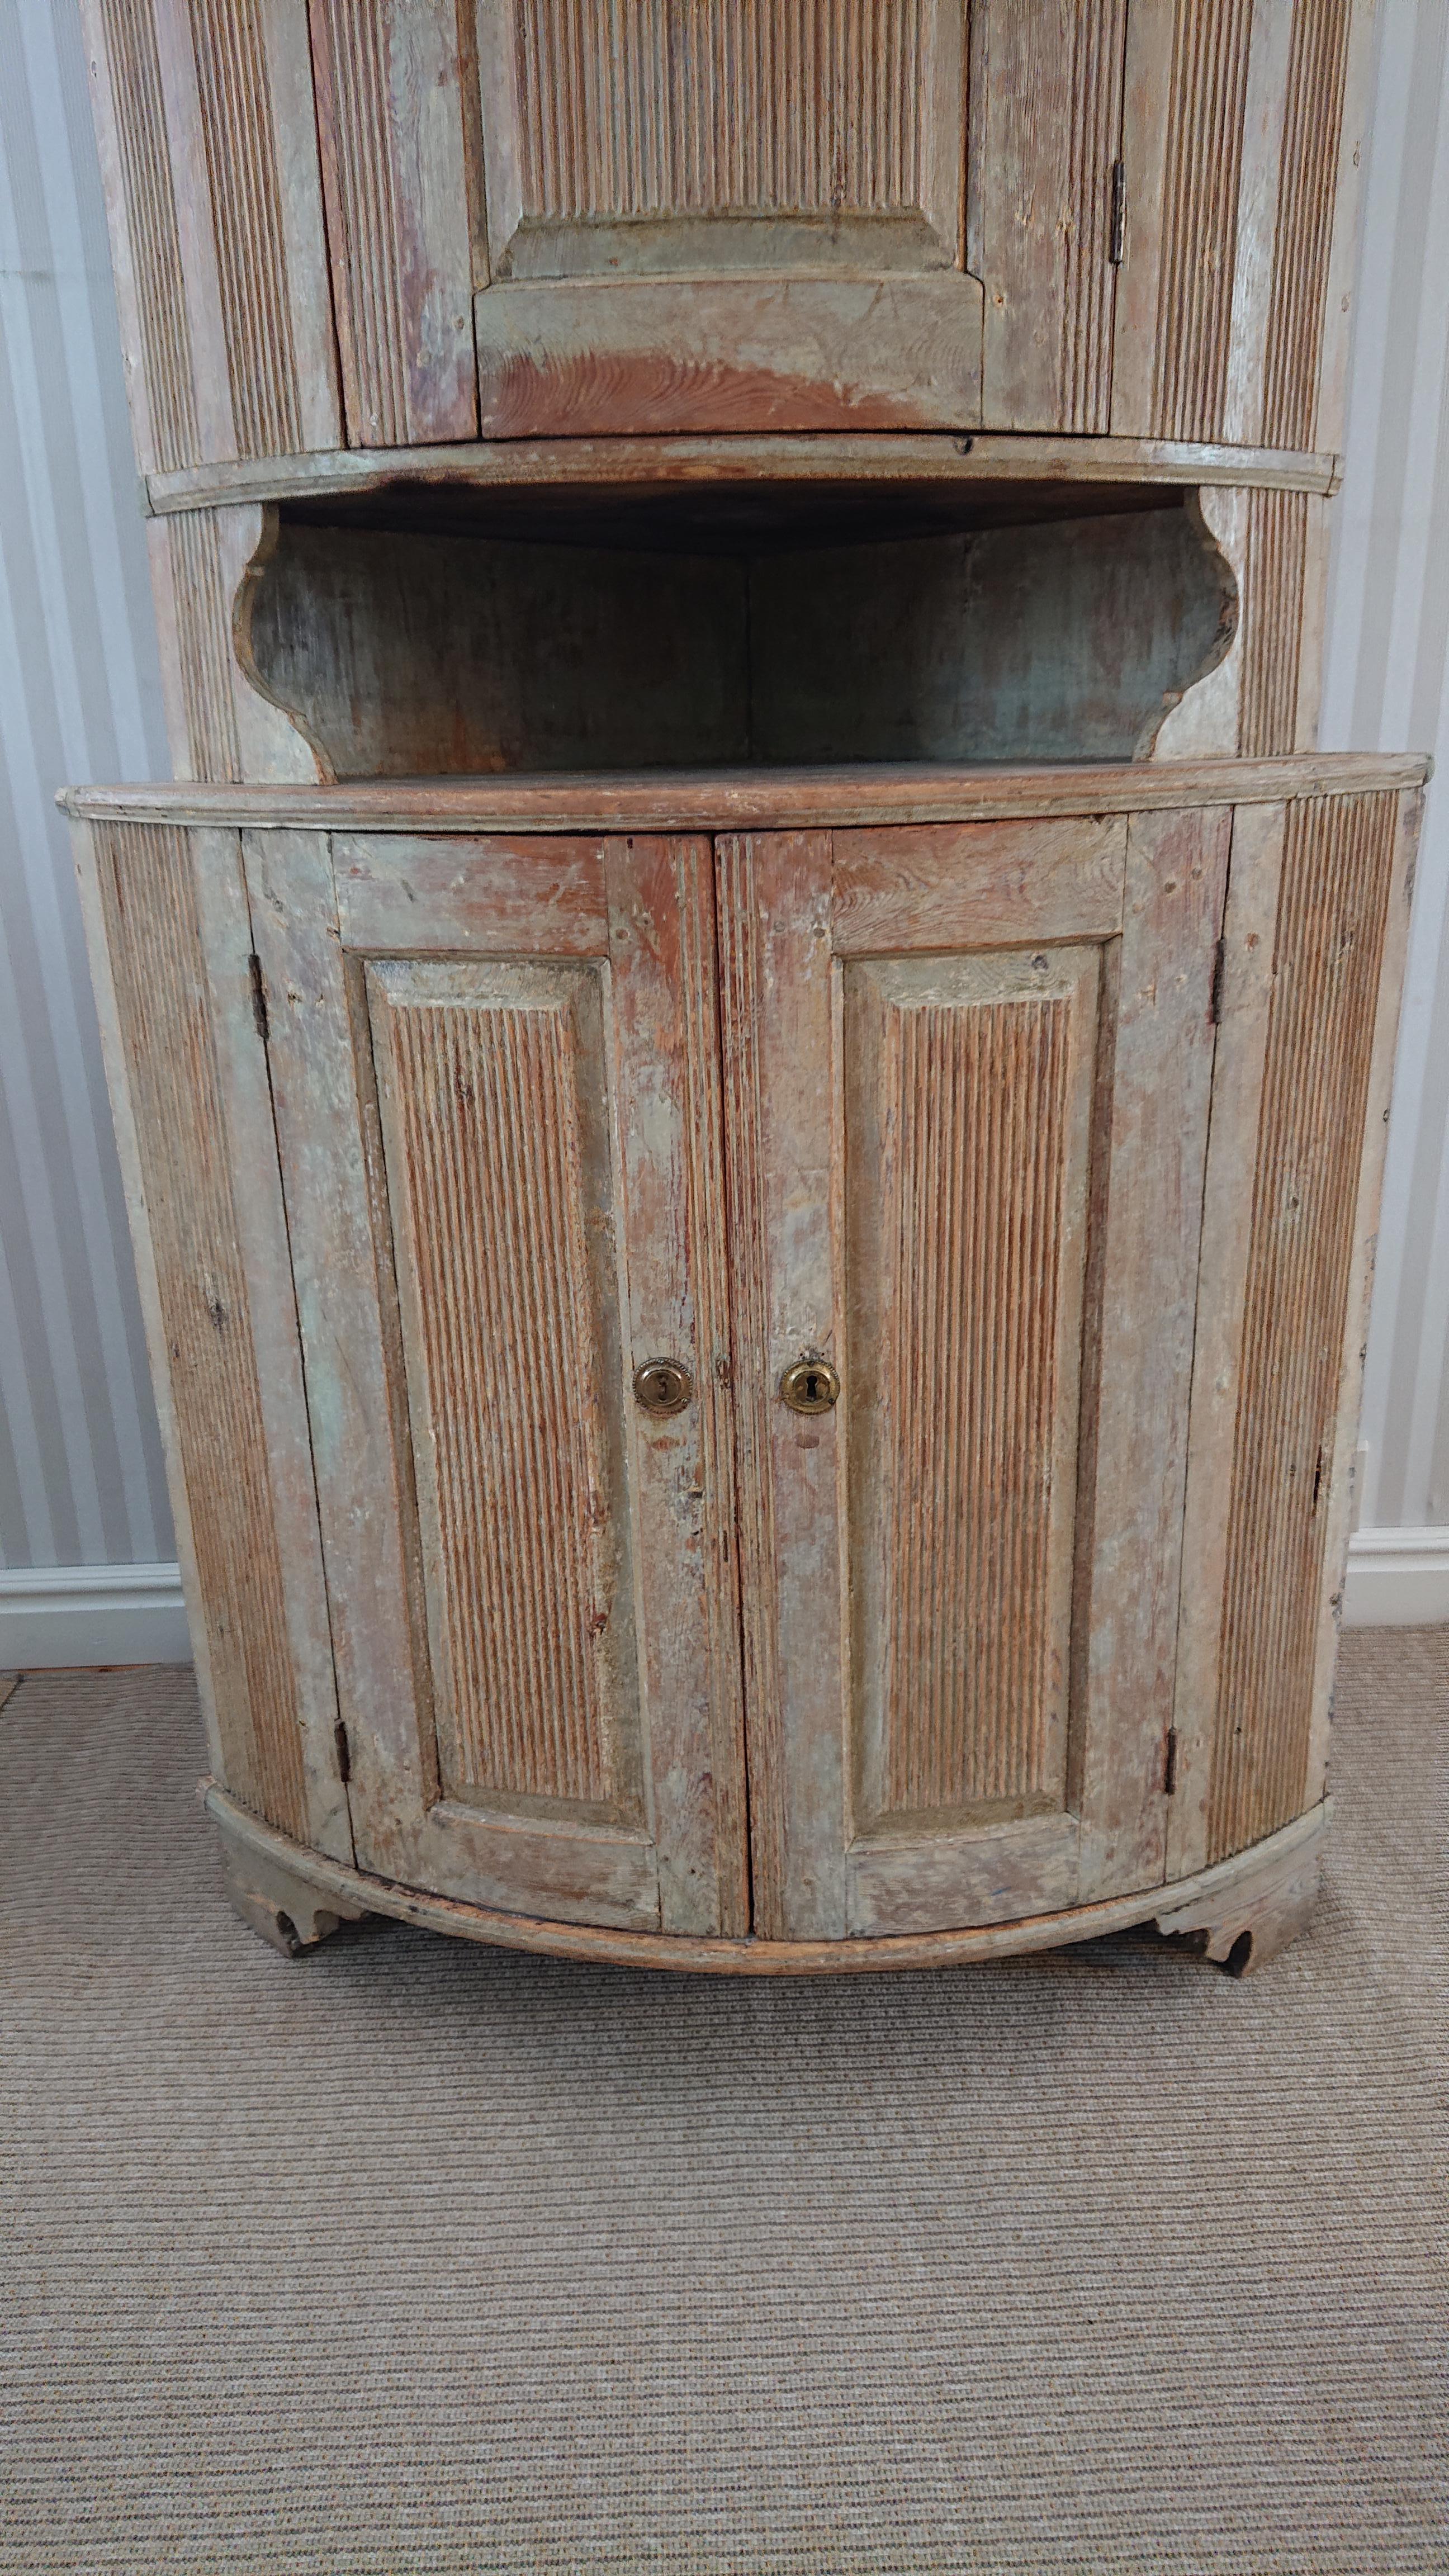 18h century Swedish Gustavian Corner Cabinet from Kalix Norrbotten, Northern Sweden.
Fantastic fine Corner Cabinet with beautiful carved and reeded details.
Scraped by hand to its well preserved original color.
Both upper and lower parts of this